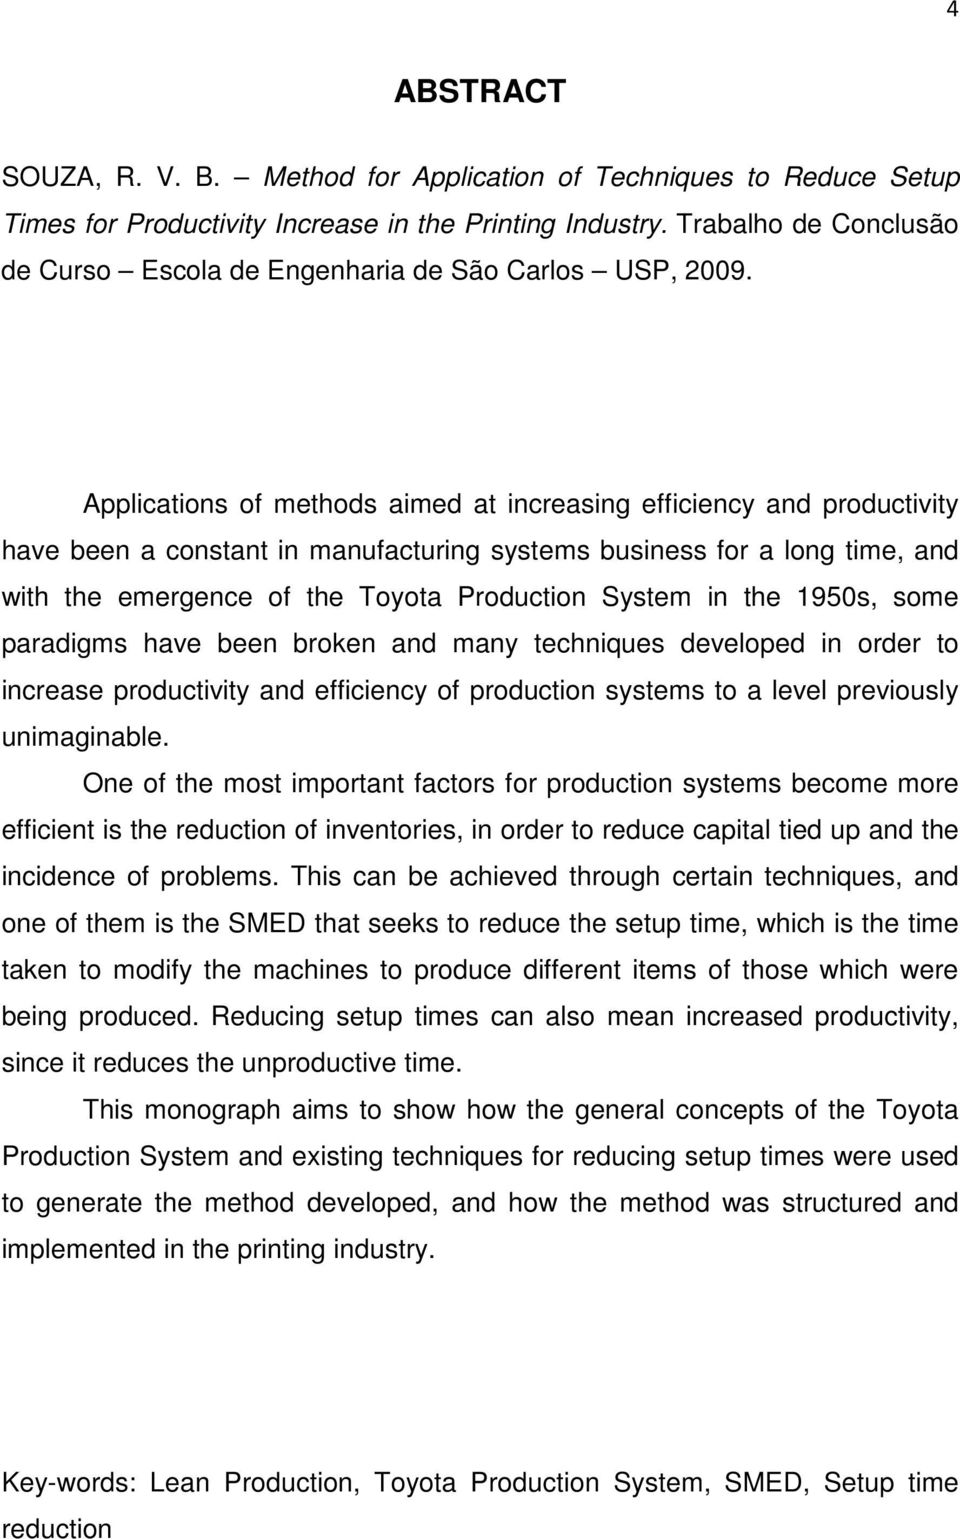 Applications of methods aimed at increasing efficiency and productivity have been a constant in manufacturing systems business for a long time, and with the emergence of the Toyota Production System